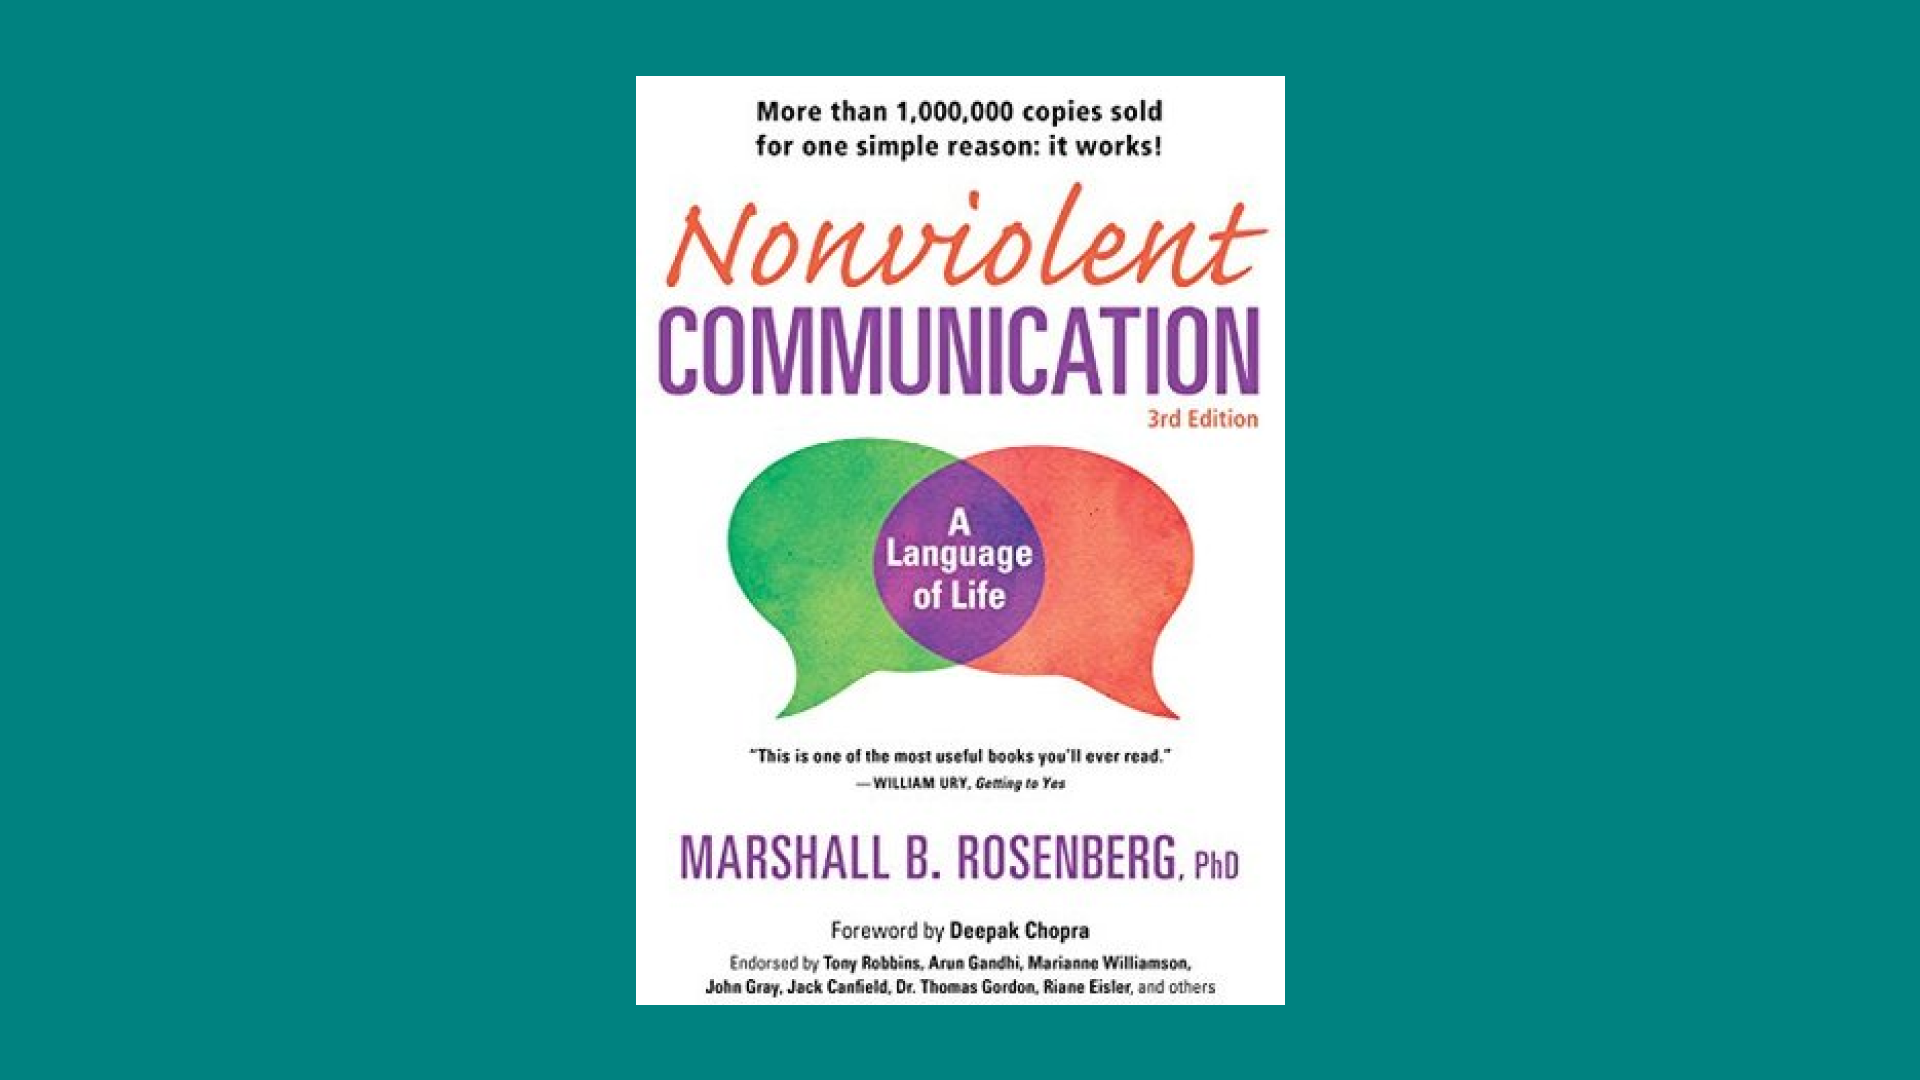  “Nonviolent Communication: A Language of Life: Life-Changing Tools for Healthy Relationships” by Marshall B. Rosenberg PhD 